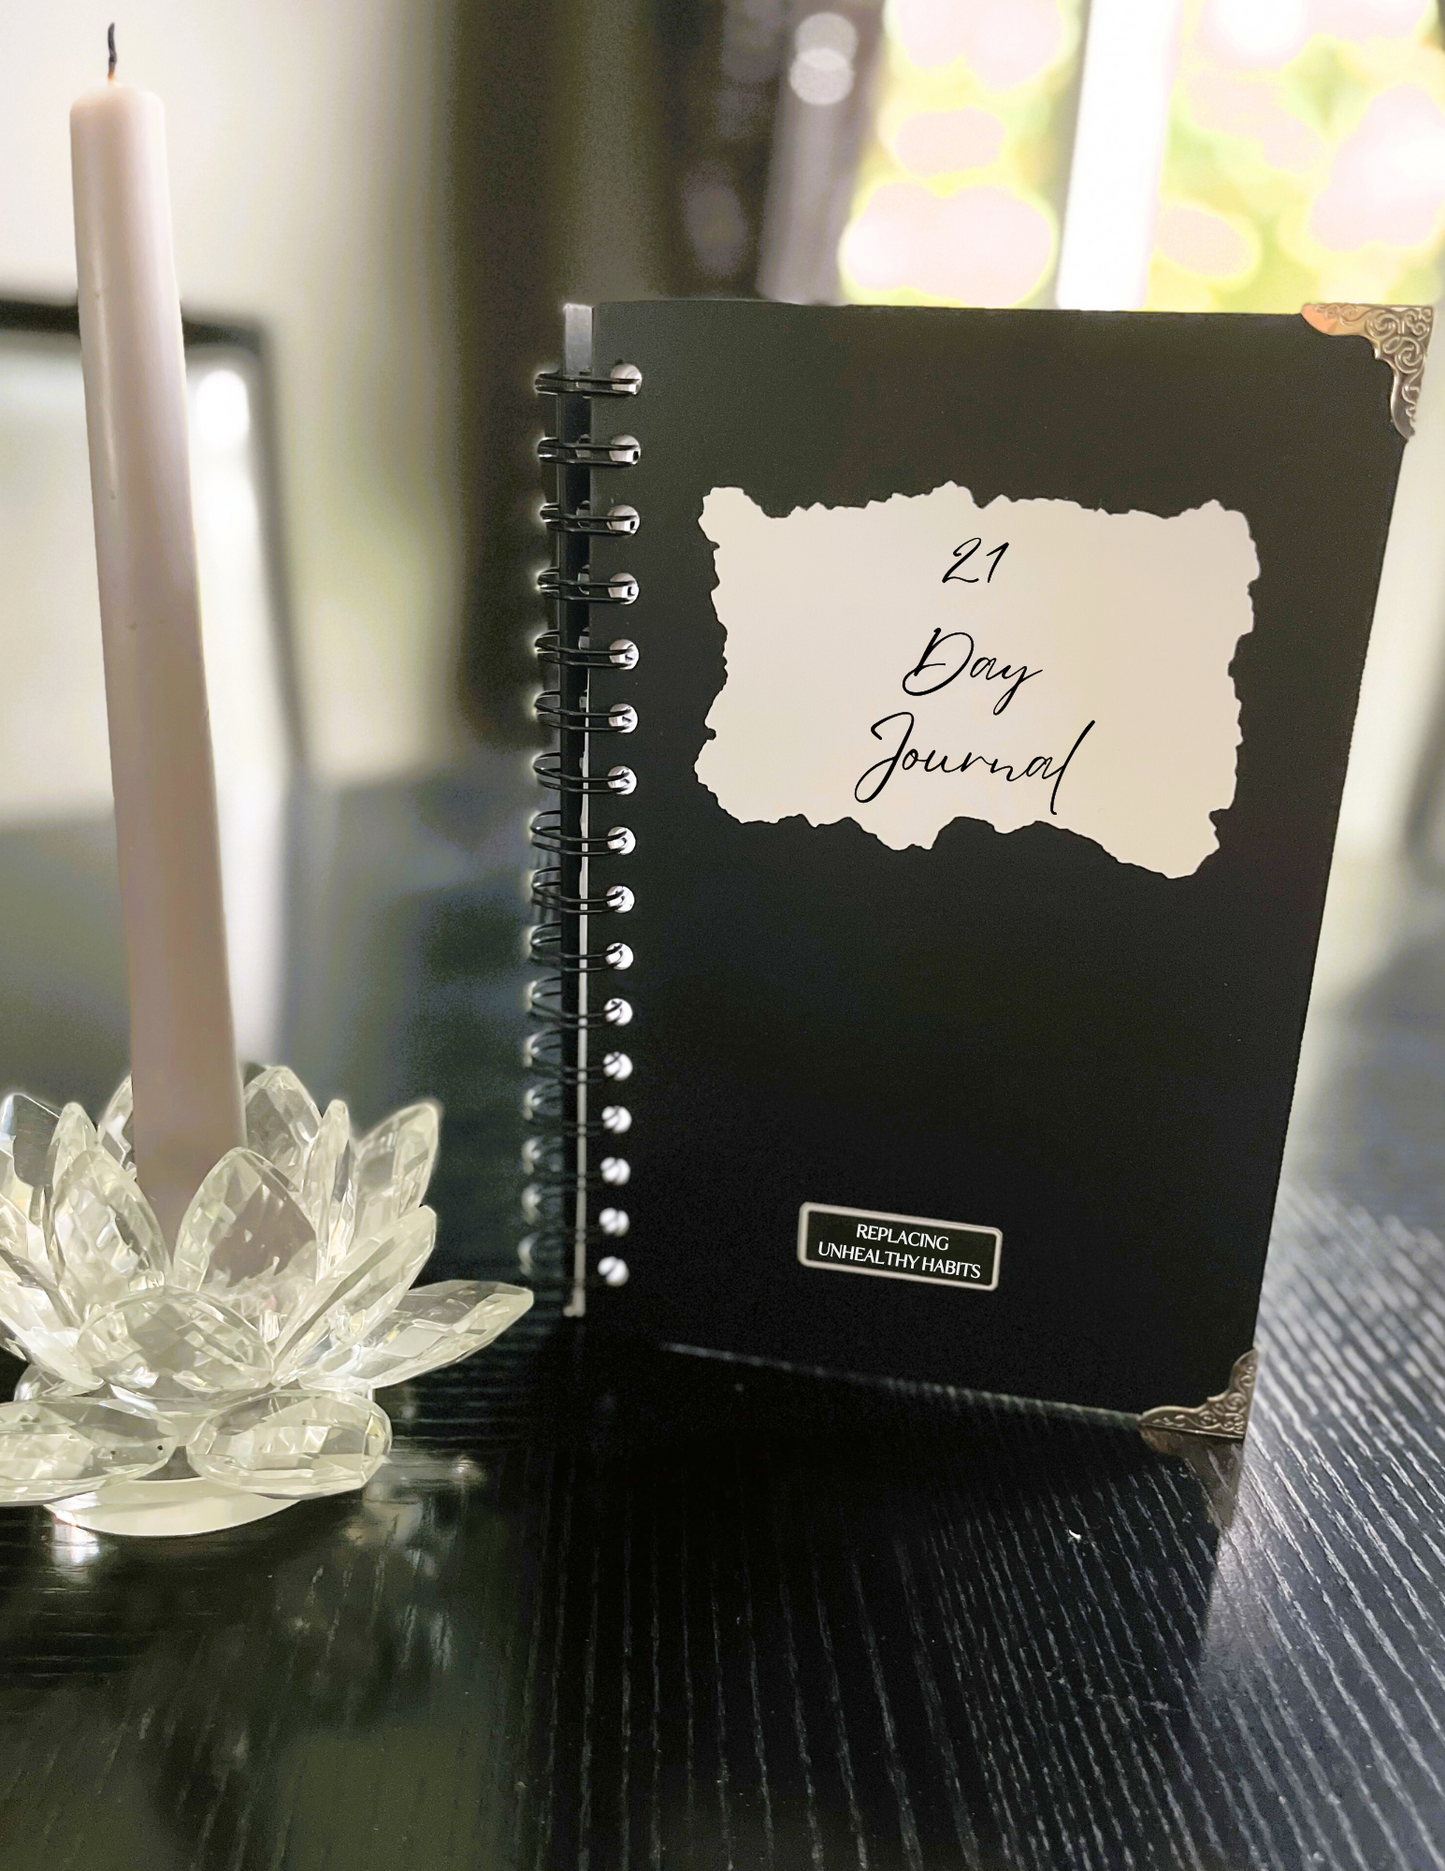 Replacing Unhealthy Habits: 21-Day Journal